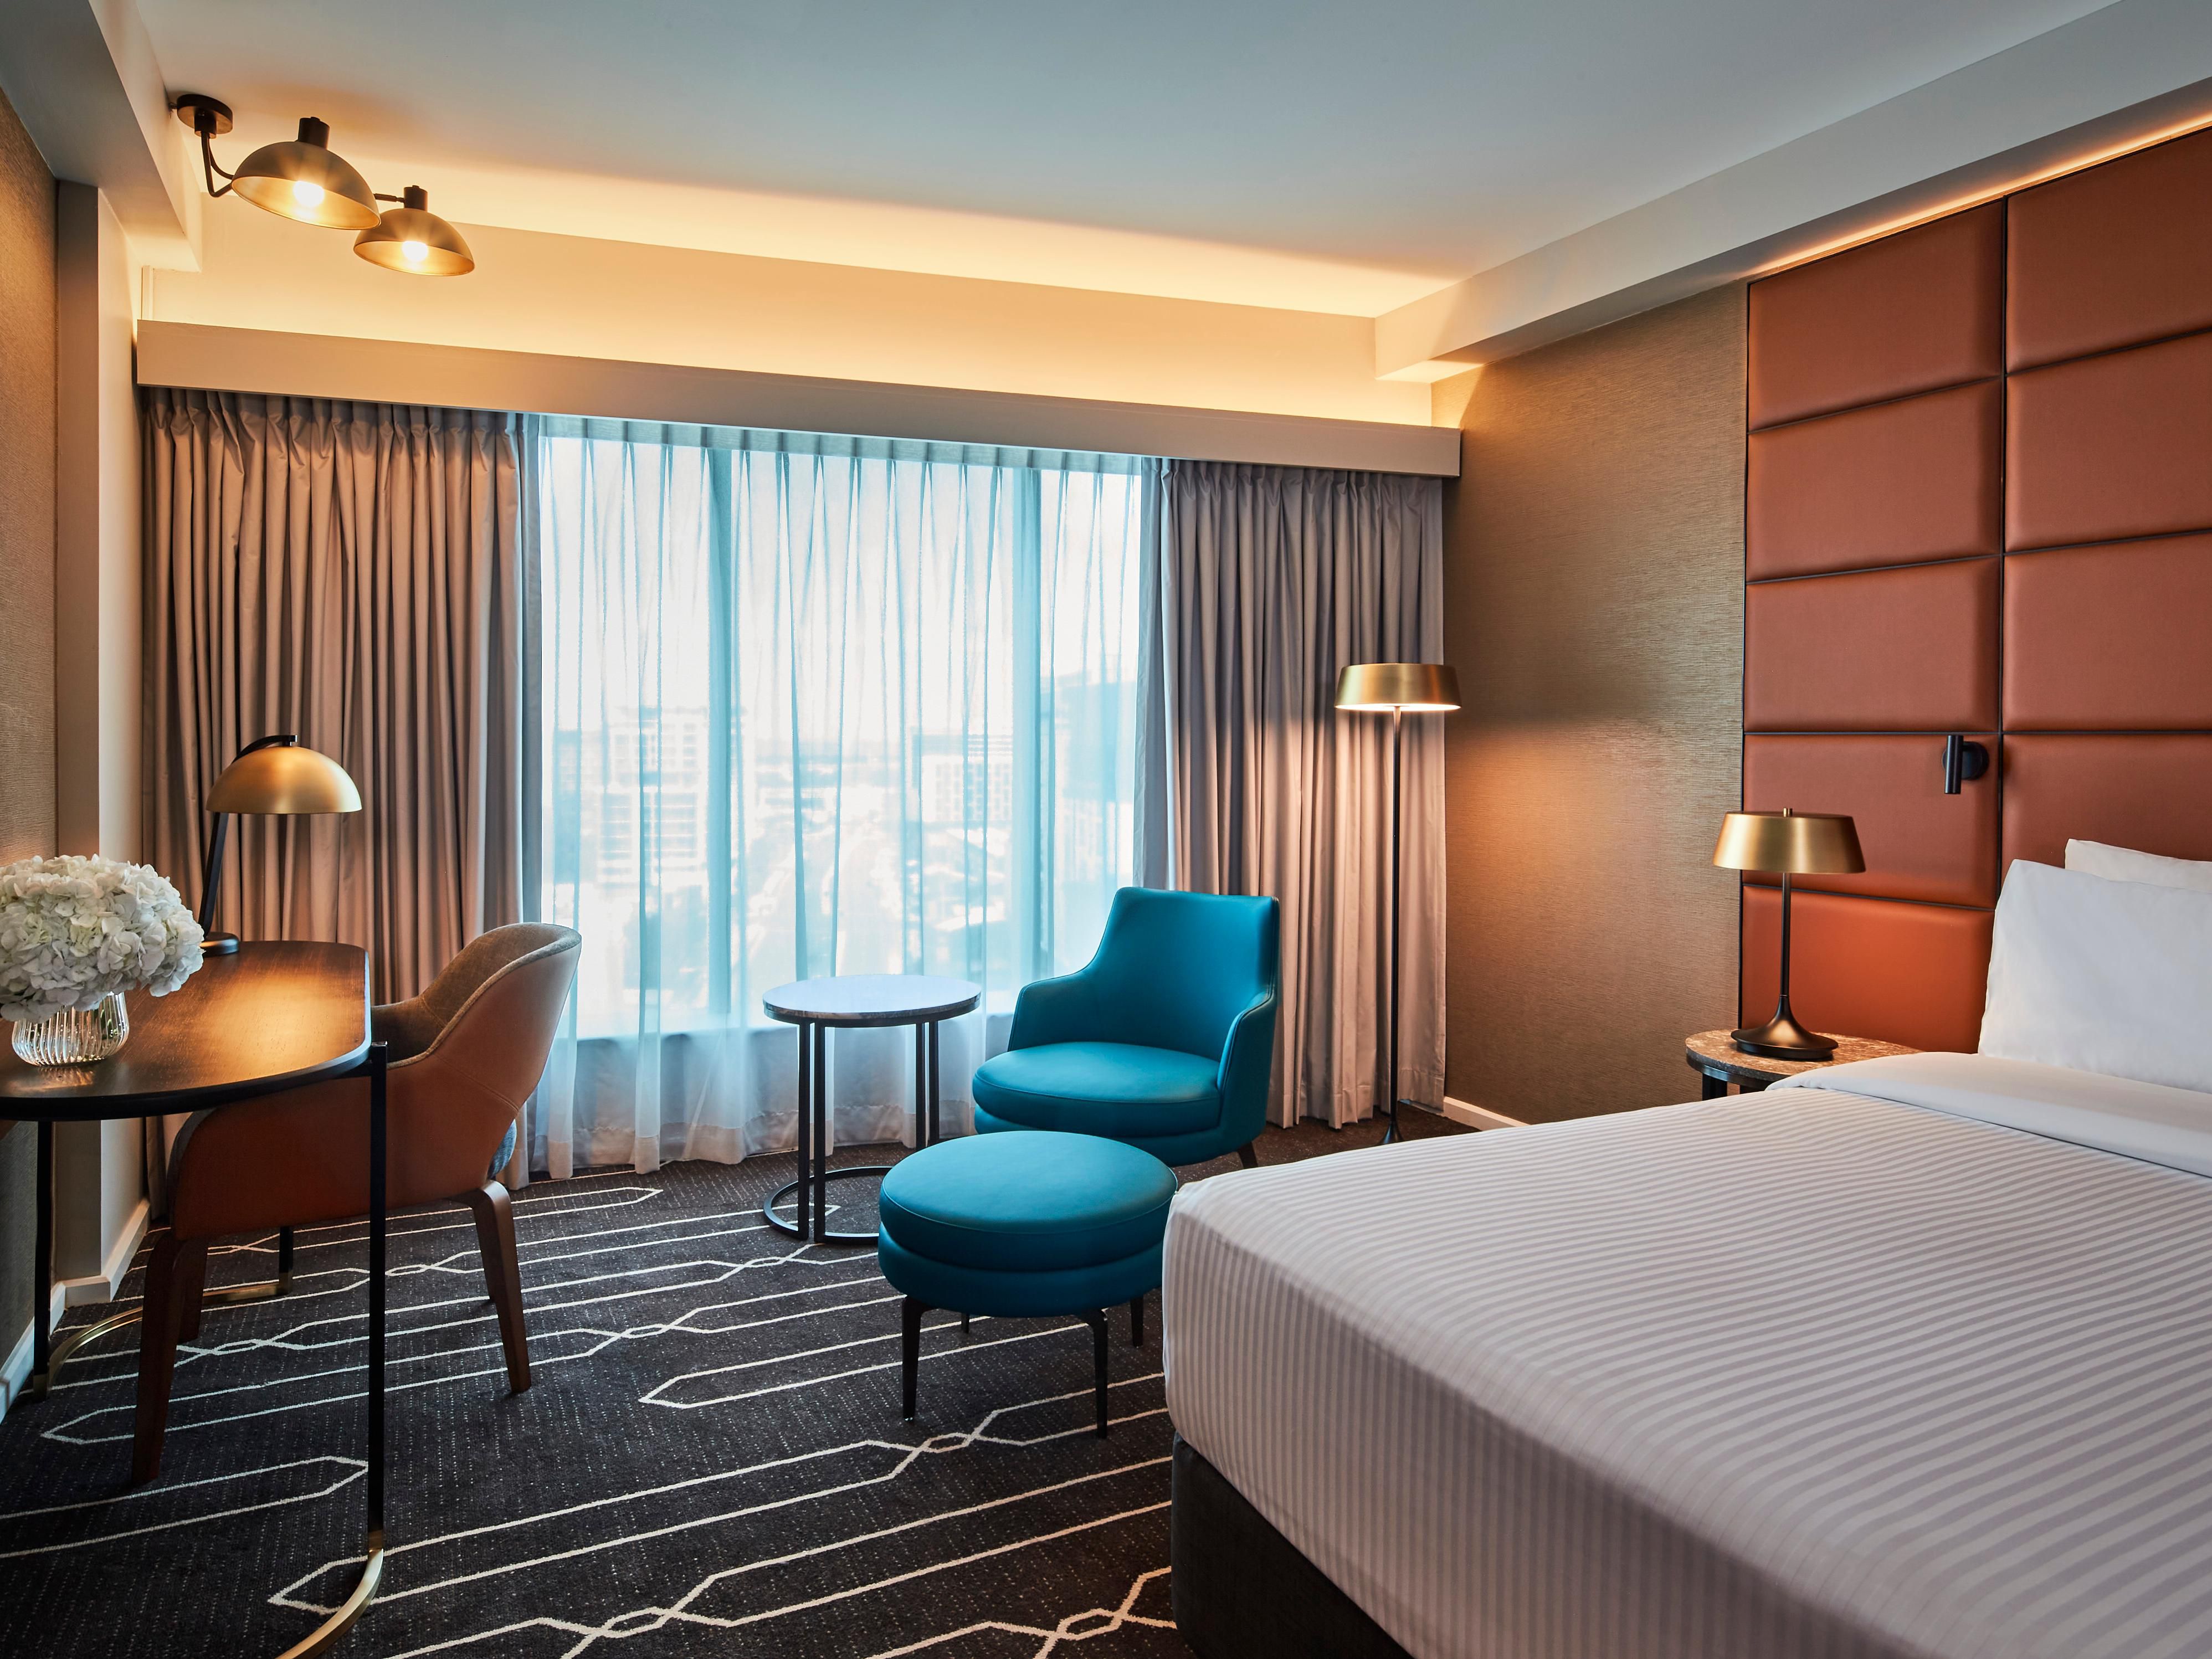 Discover our newly refurbished Superior King and Junior Suites at Holiday Inn Sydney Airport. Each of the rooms have been thoughtfully designed with the modern traveller in mind. Features include double glazed windows for the perfect sleep in and Soak amenities.